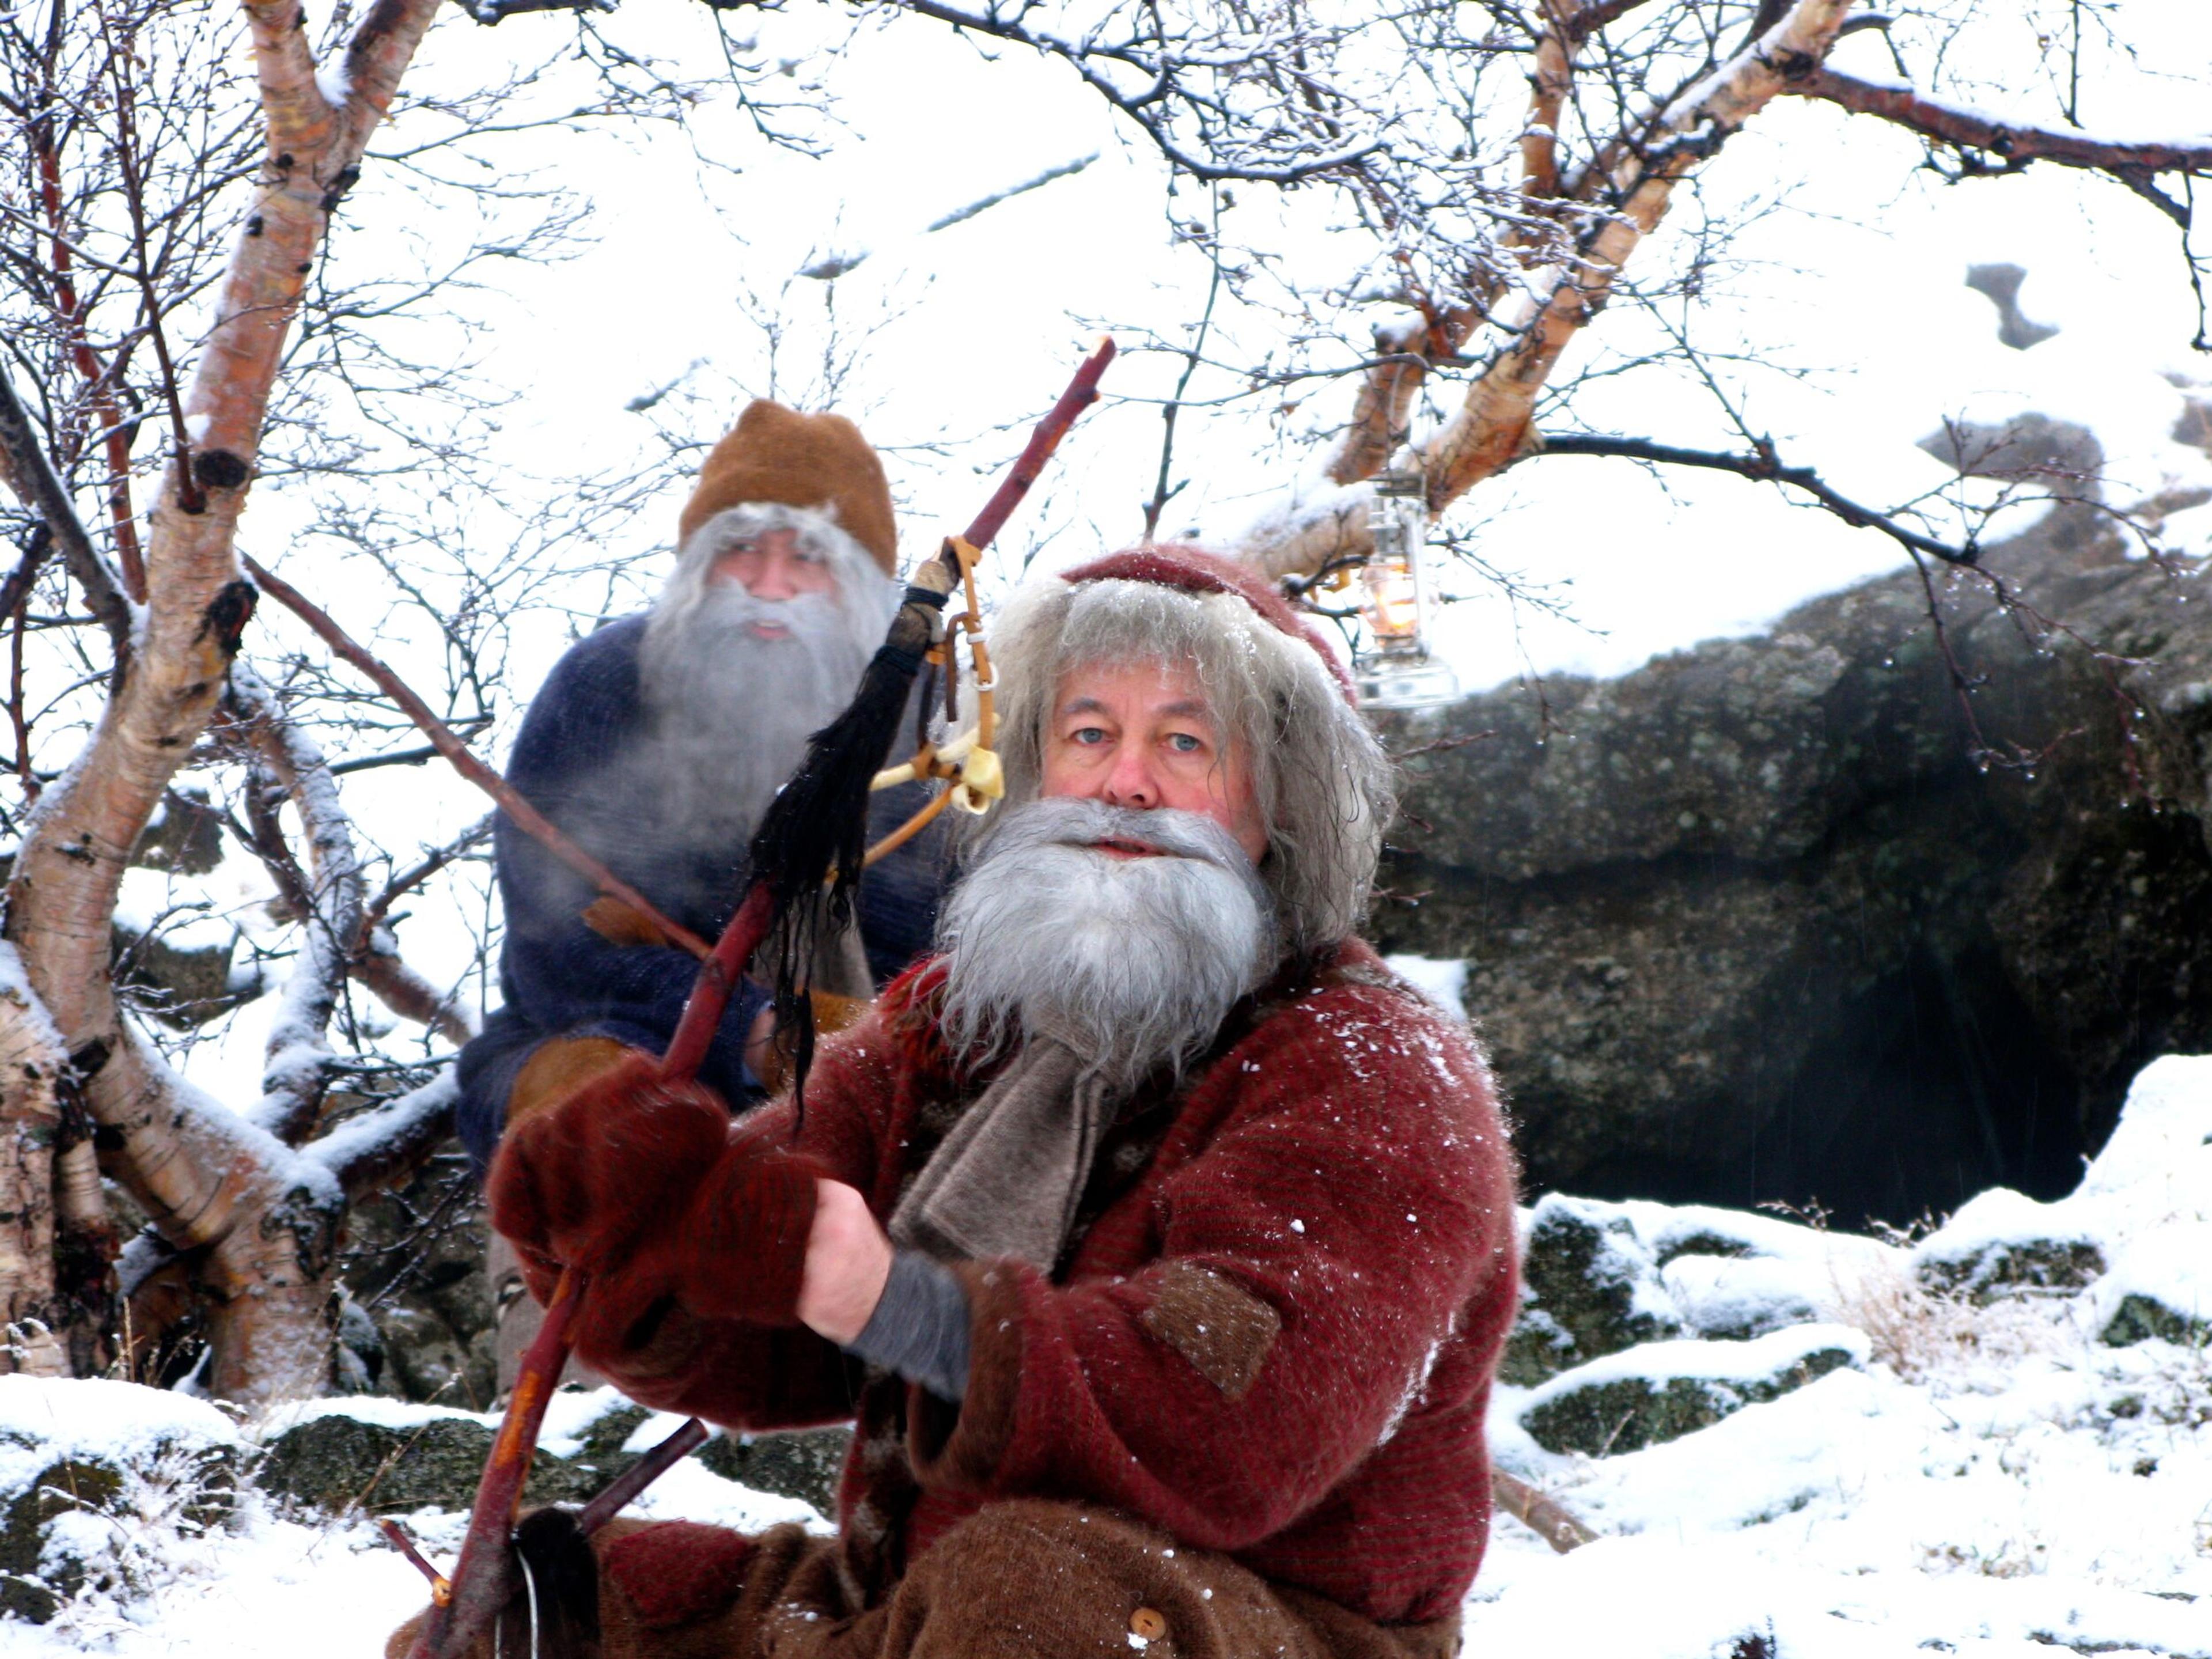 "Two figures dressed in traditional Icelandic Yule Lad costumes, with long white beards and colorful robes, standing in a snowy landscape, one in the foreground holding a wooden staff, and the other in the background amidst bare winter branches.